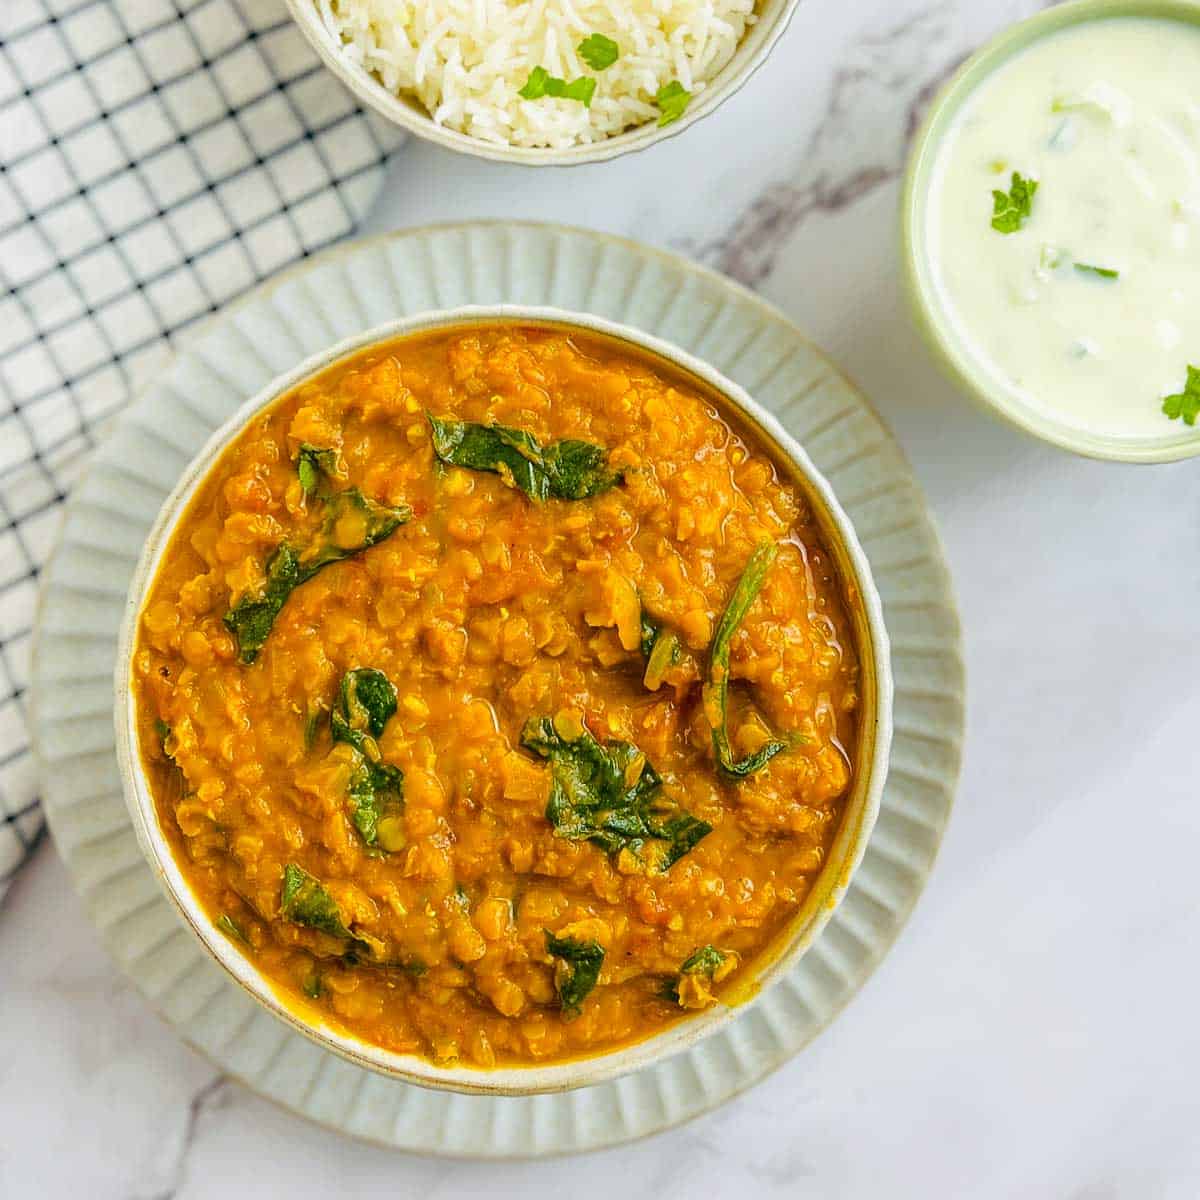 Red lentil dal served with rice and raita.